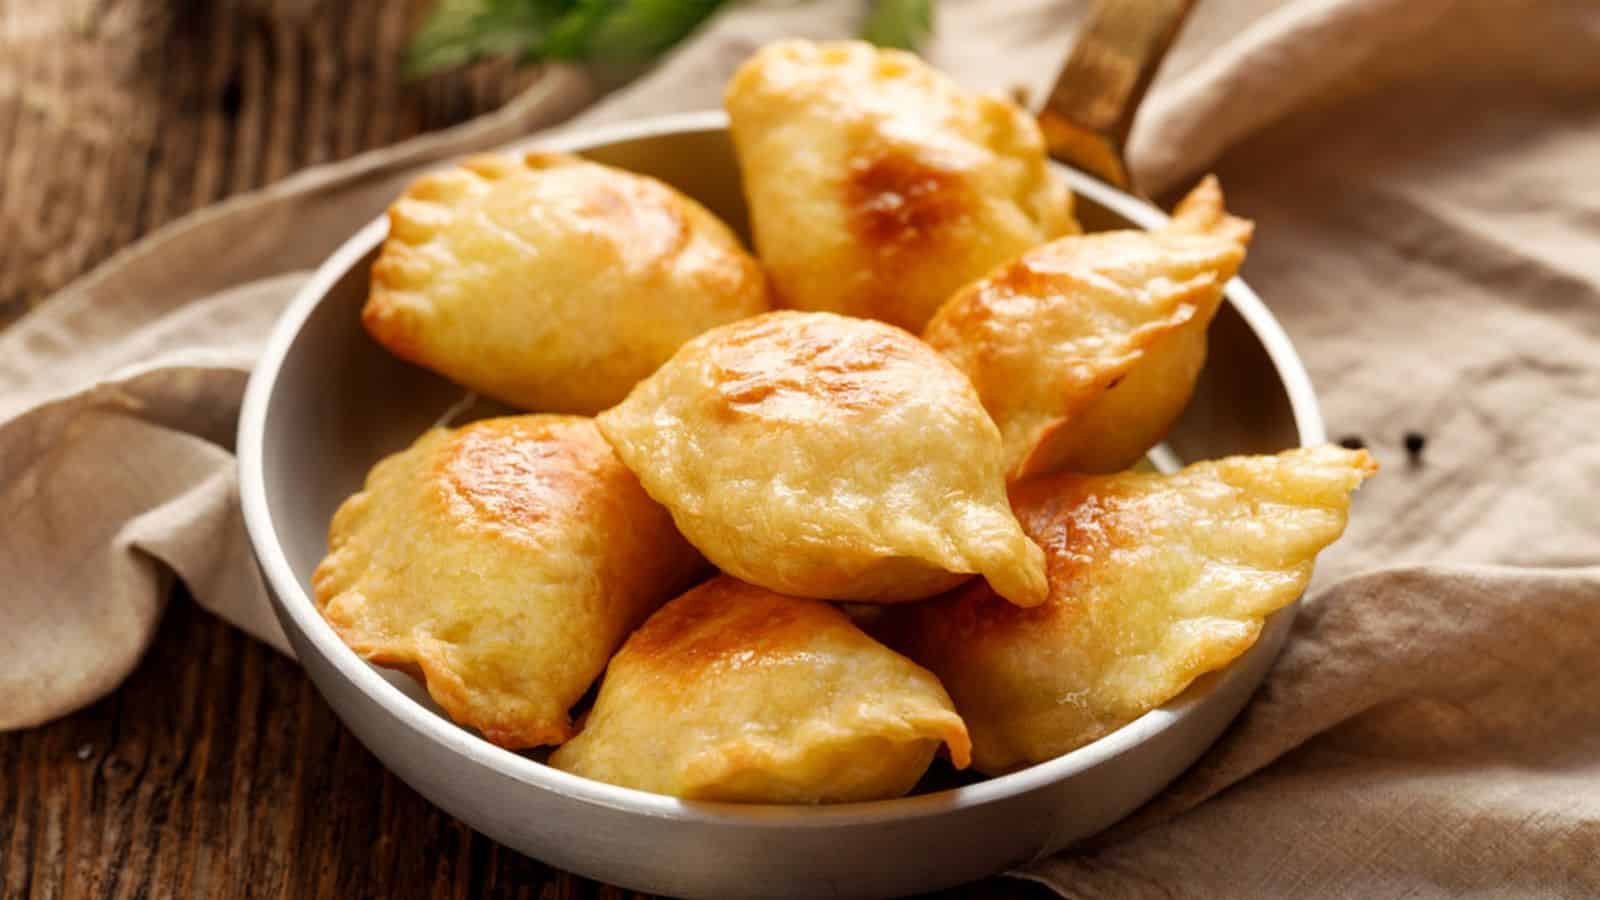 Baked dumplings stuffed with curd cheese and potatoes